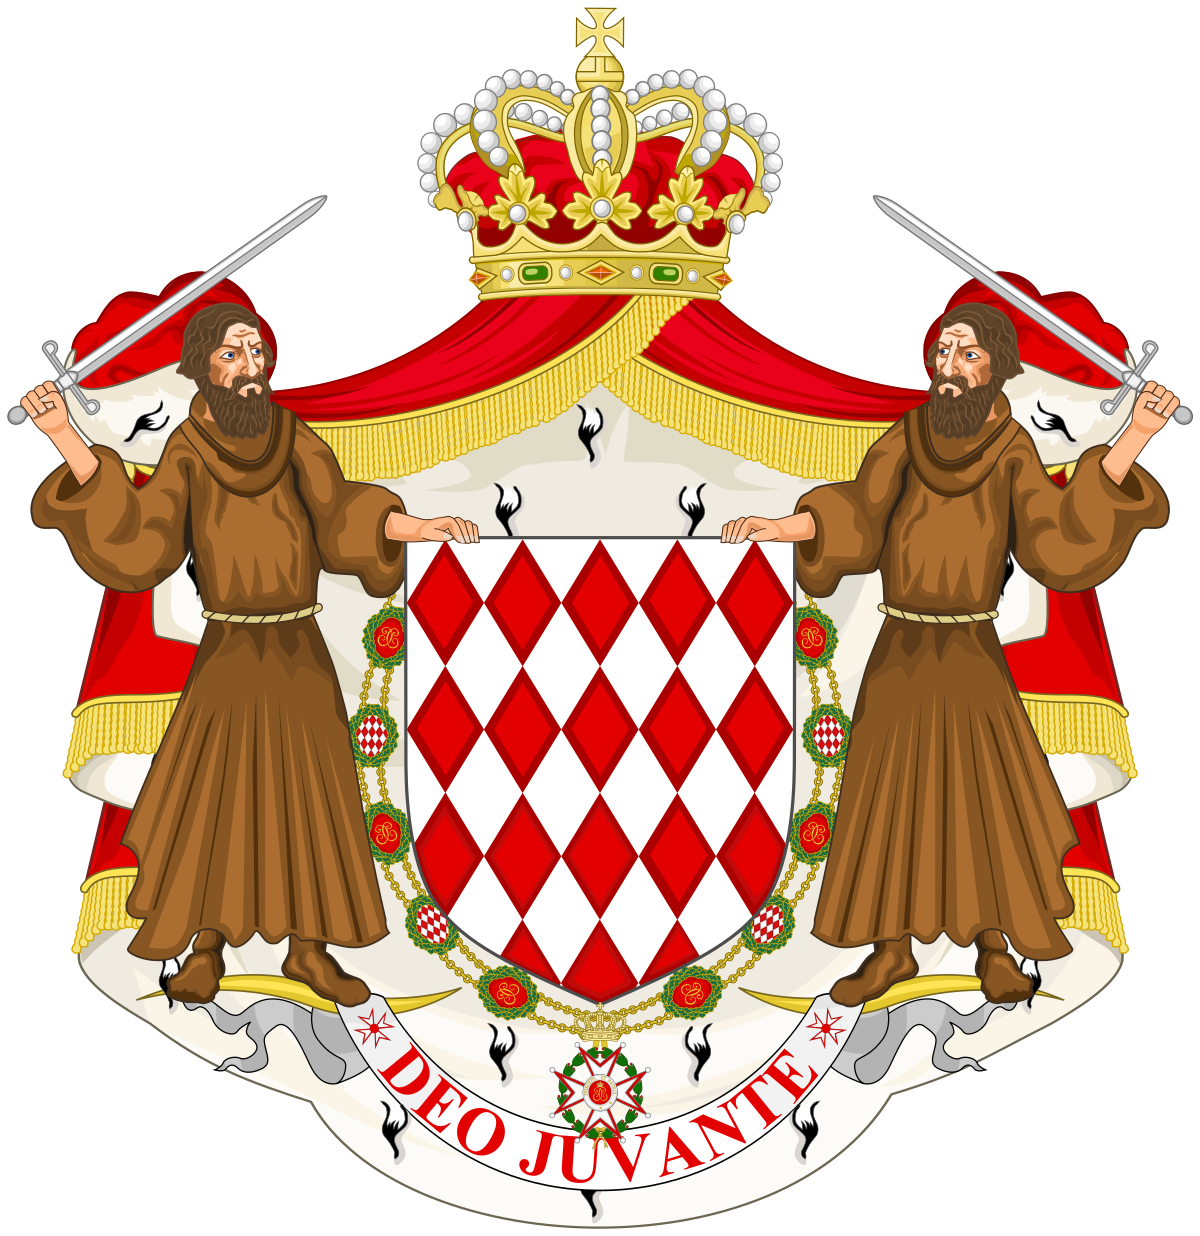 1200px-Great_coat_of_arms_of_the_house_of_Grimaldi.svg.png